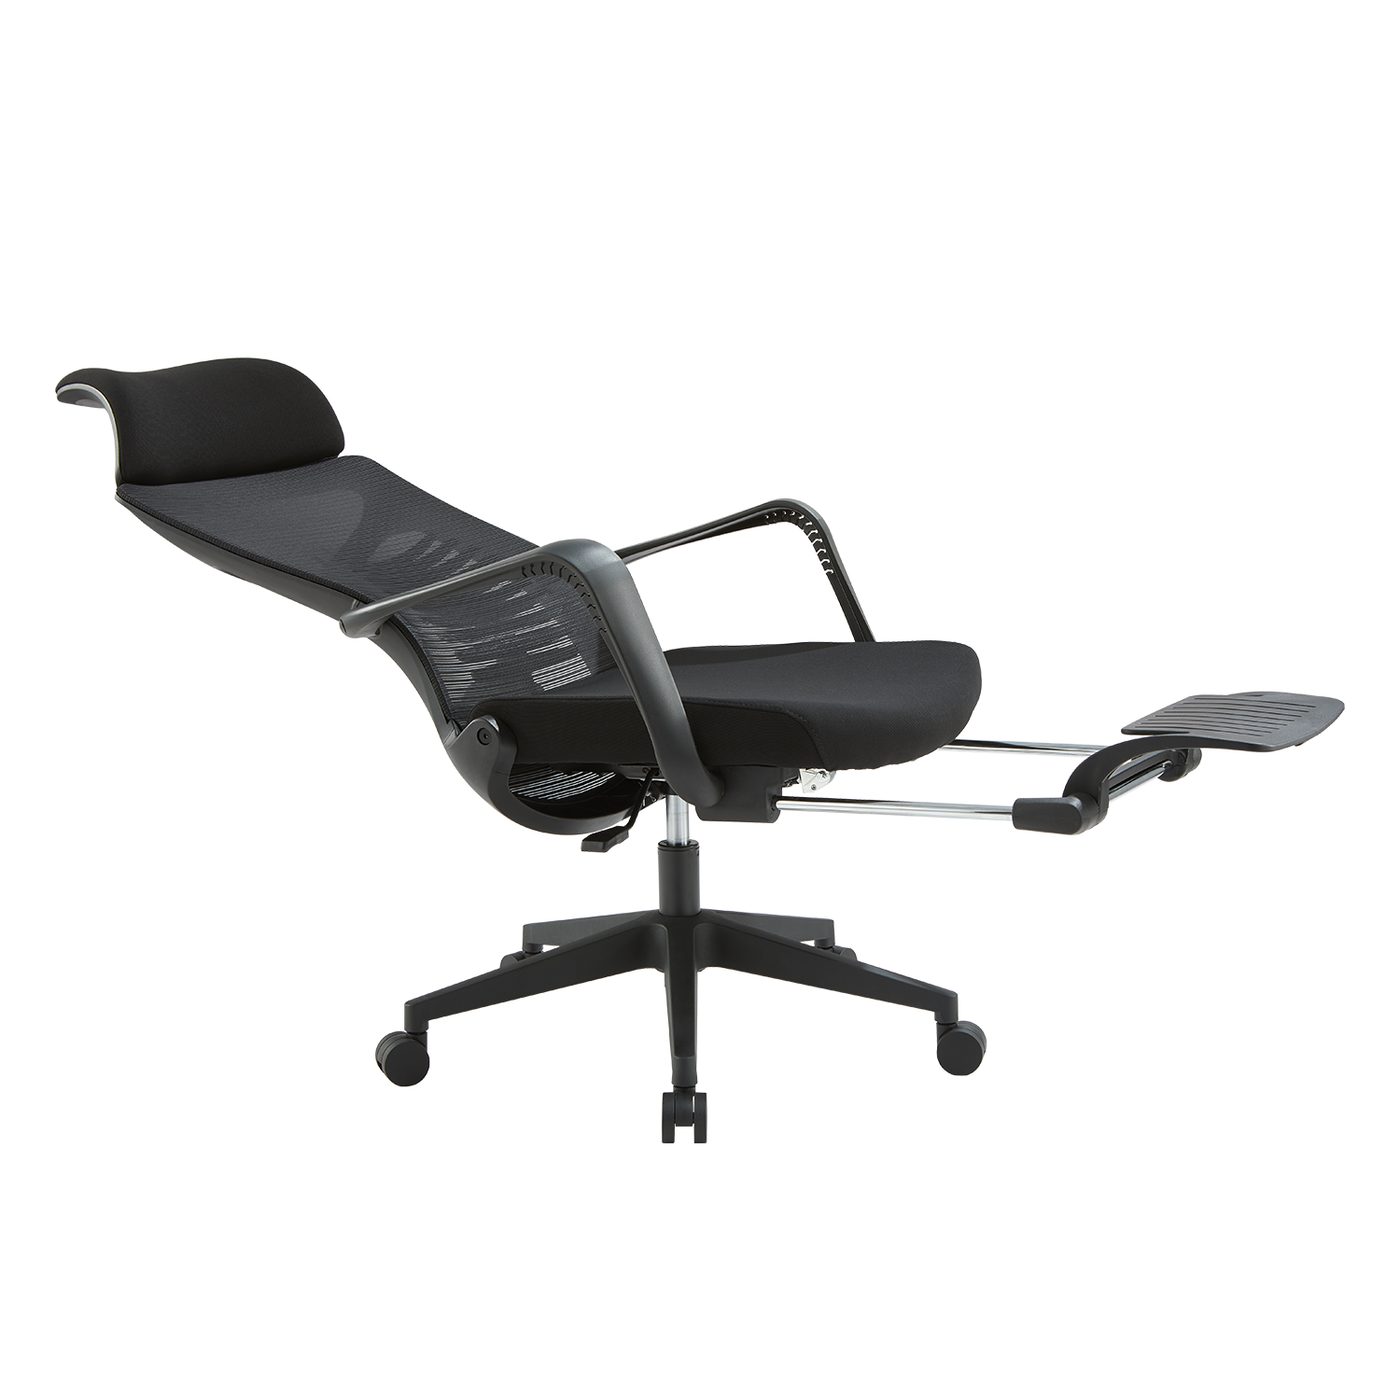 https://cdn.shopify.com/s/files/1/0503/1293/7661/products/Fish_Bone_Shape_Lumbar_Support_Ergonomic_Chair_with_Headrest_Footrest_1_1400x.png?v=1622525202